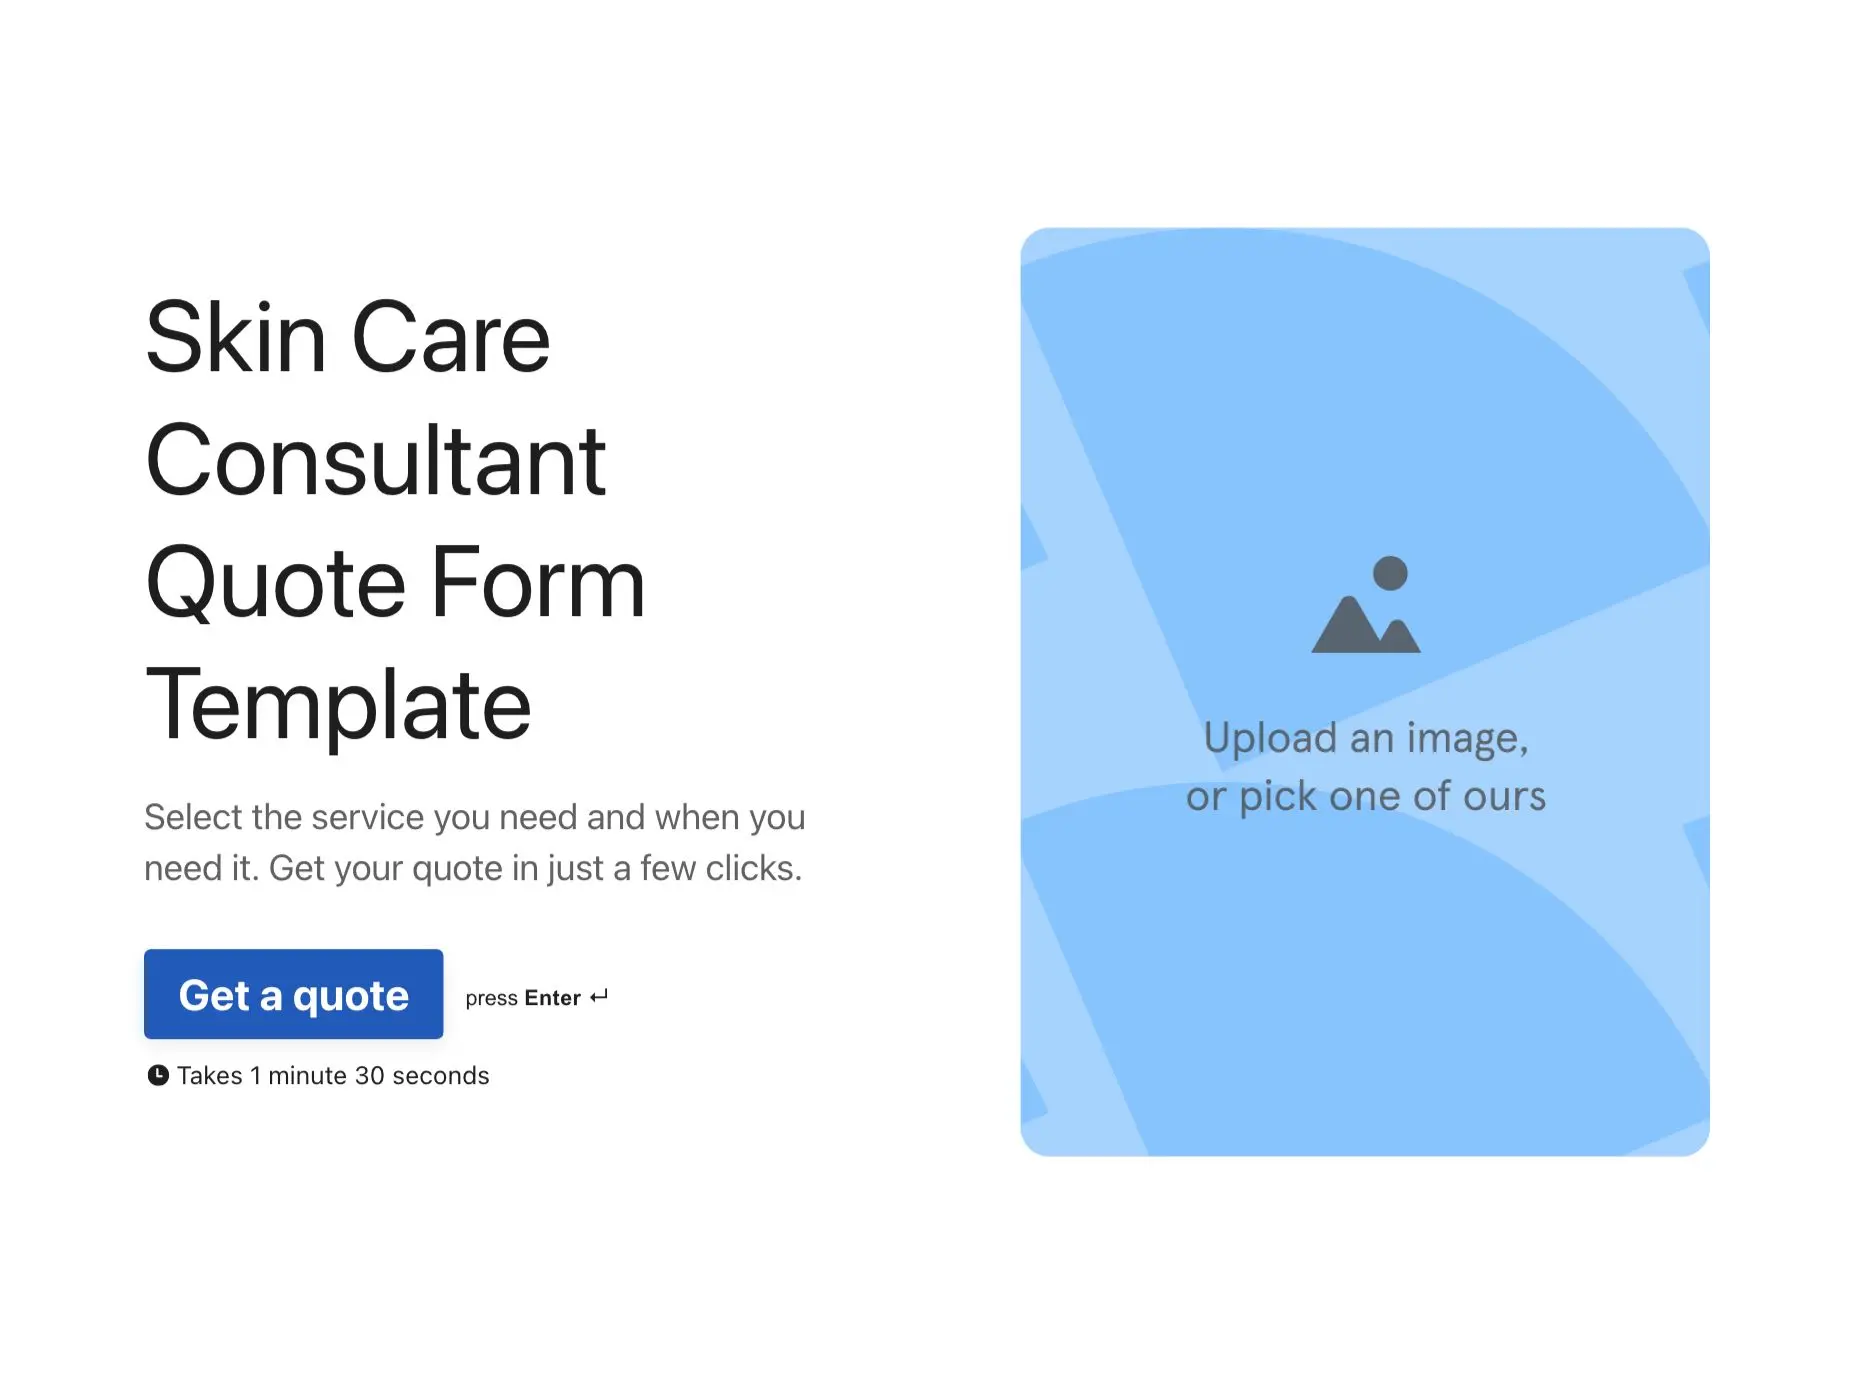 Skin Care Consultant Quote Form Template Hero